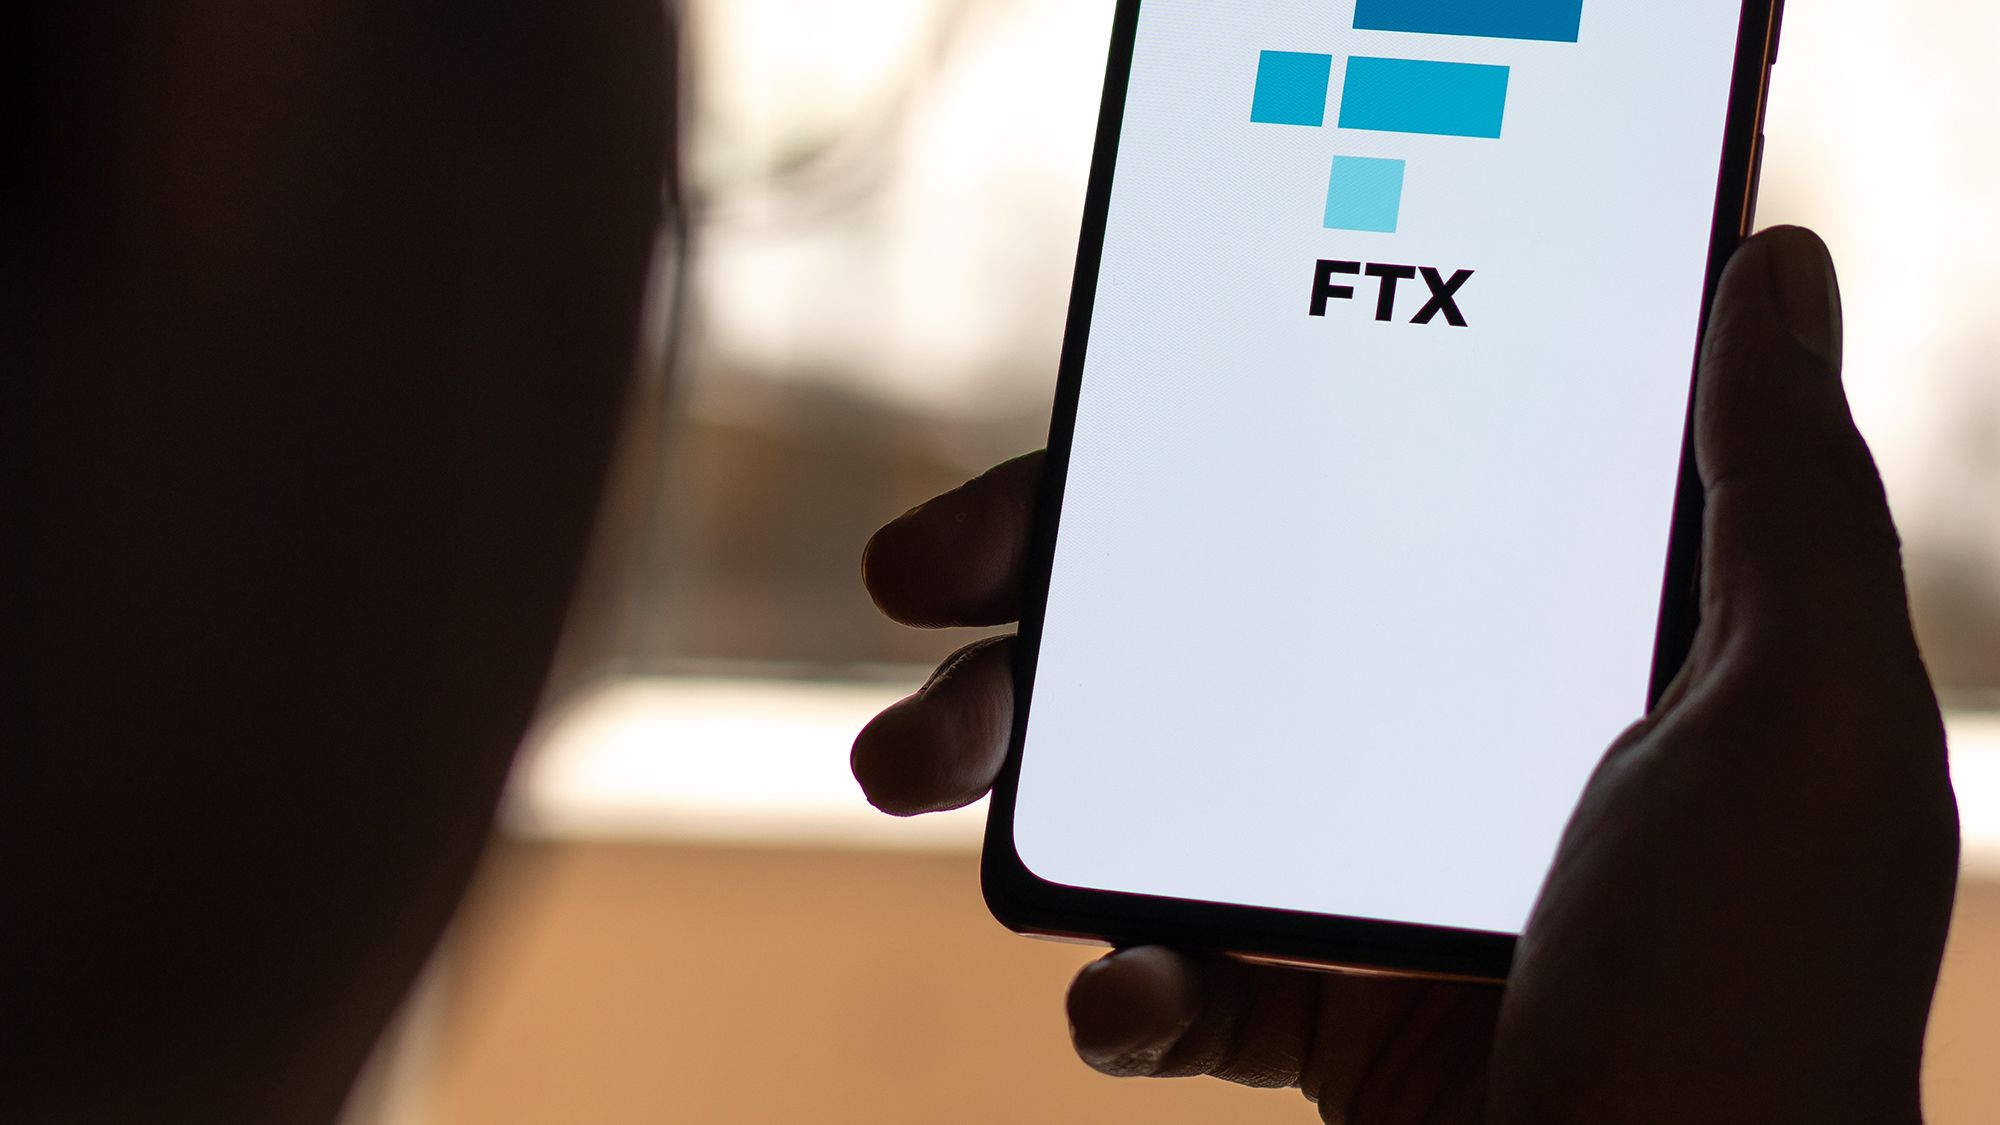 Customers who trusted crypto giant FTX may be left with nothing